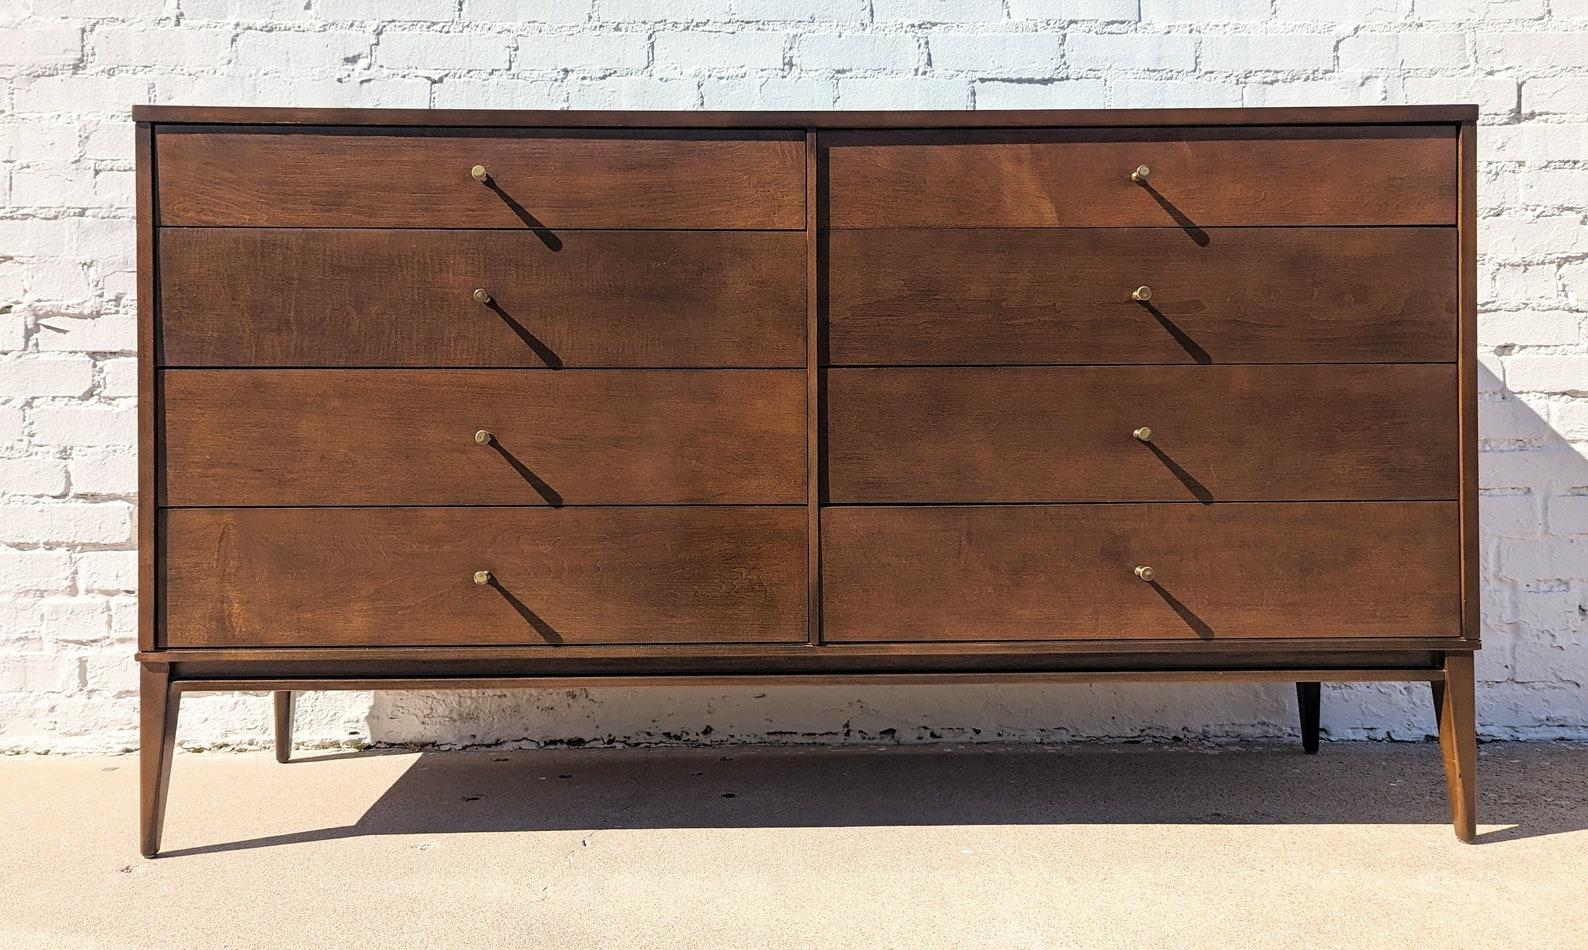 Mid Century Modern Paul McCobb Eight Drawer Dresser
 
Above average vintage condition and structurally sound. Has some expected slight finish wear and scratching. Has a couple small dings and discolorations on top. Two mitered trim edges on the